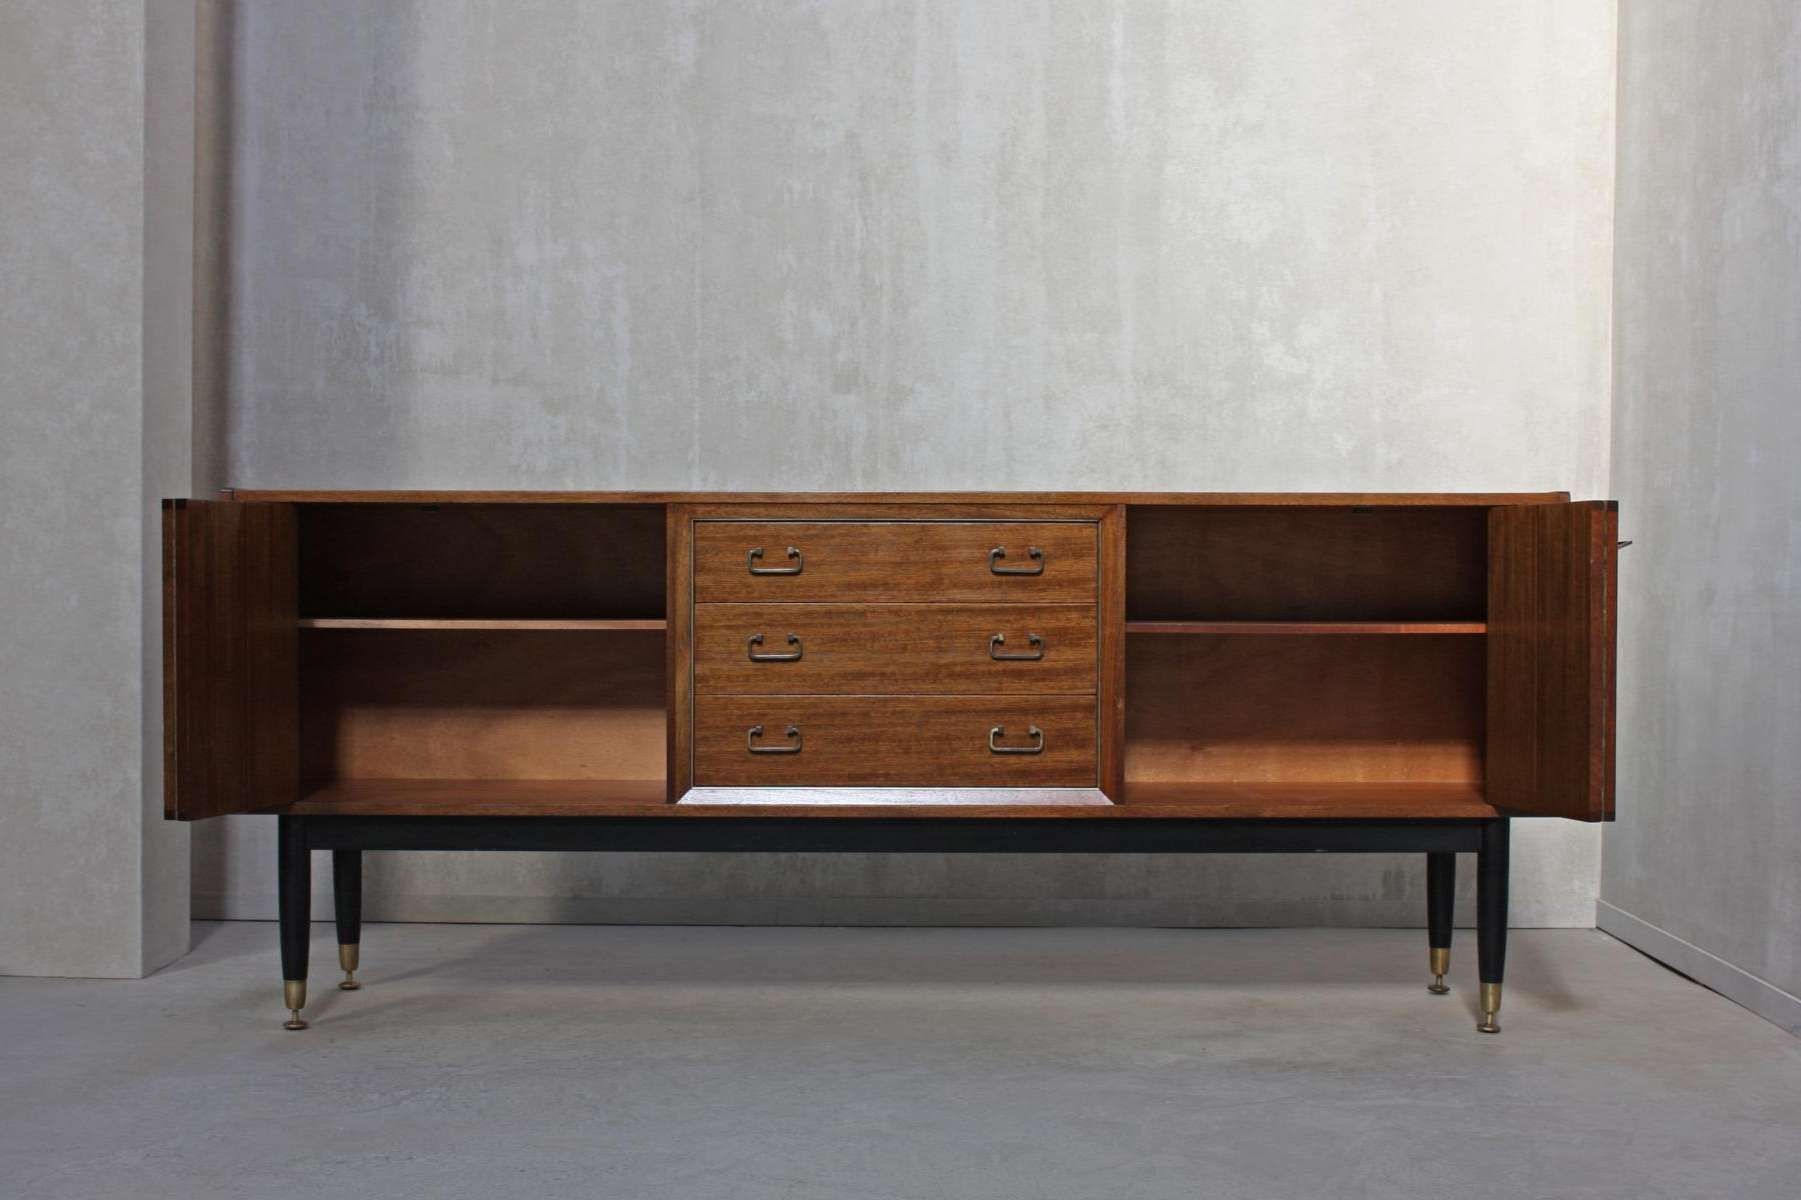 Vintage Sideboard From G Plan, 1950s For Sale At Pamono For G Plan Vintage Sideboards (View 3 of 20)